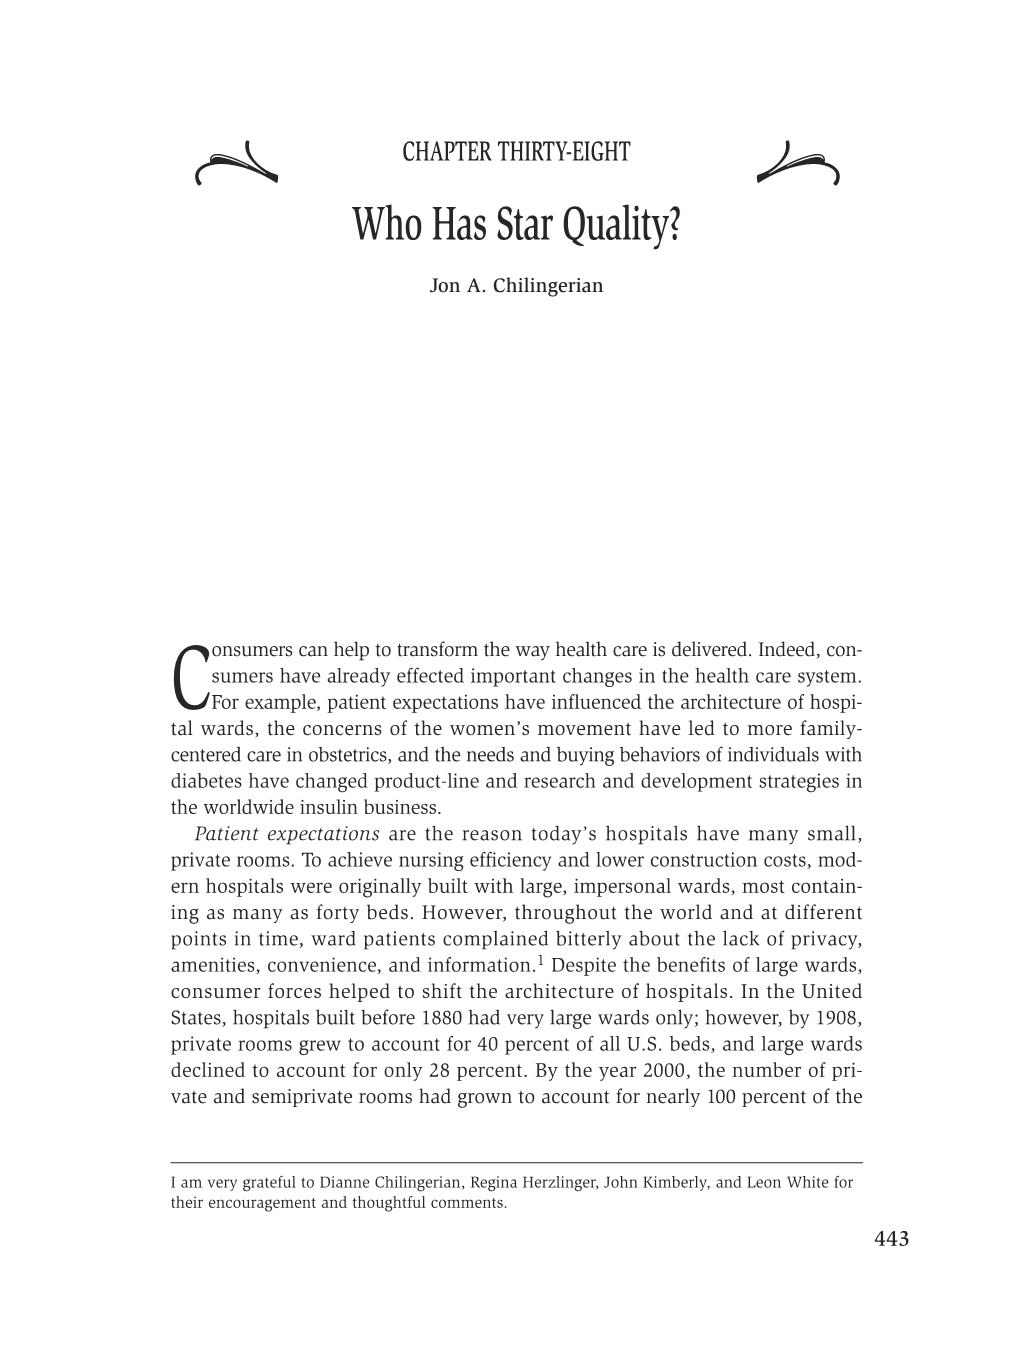 Who Has Star Quality?